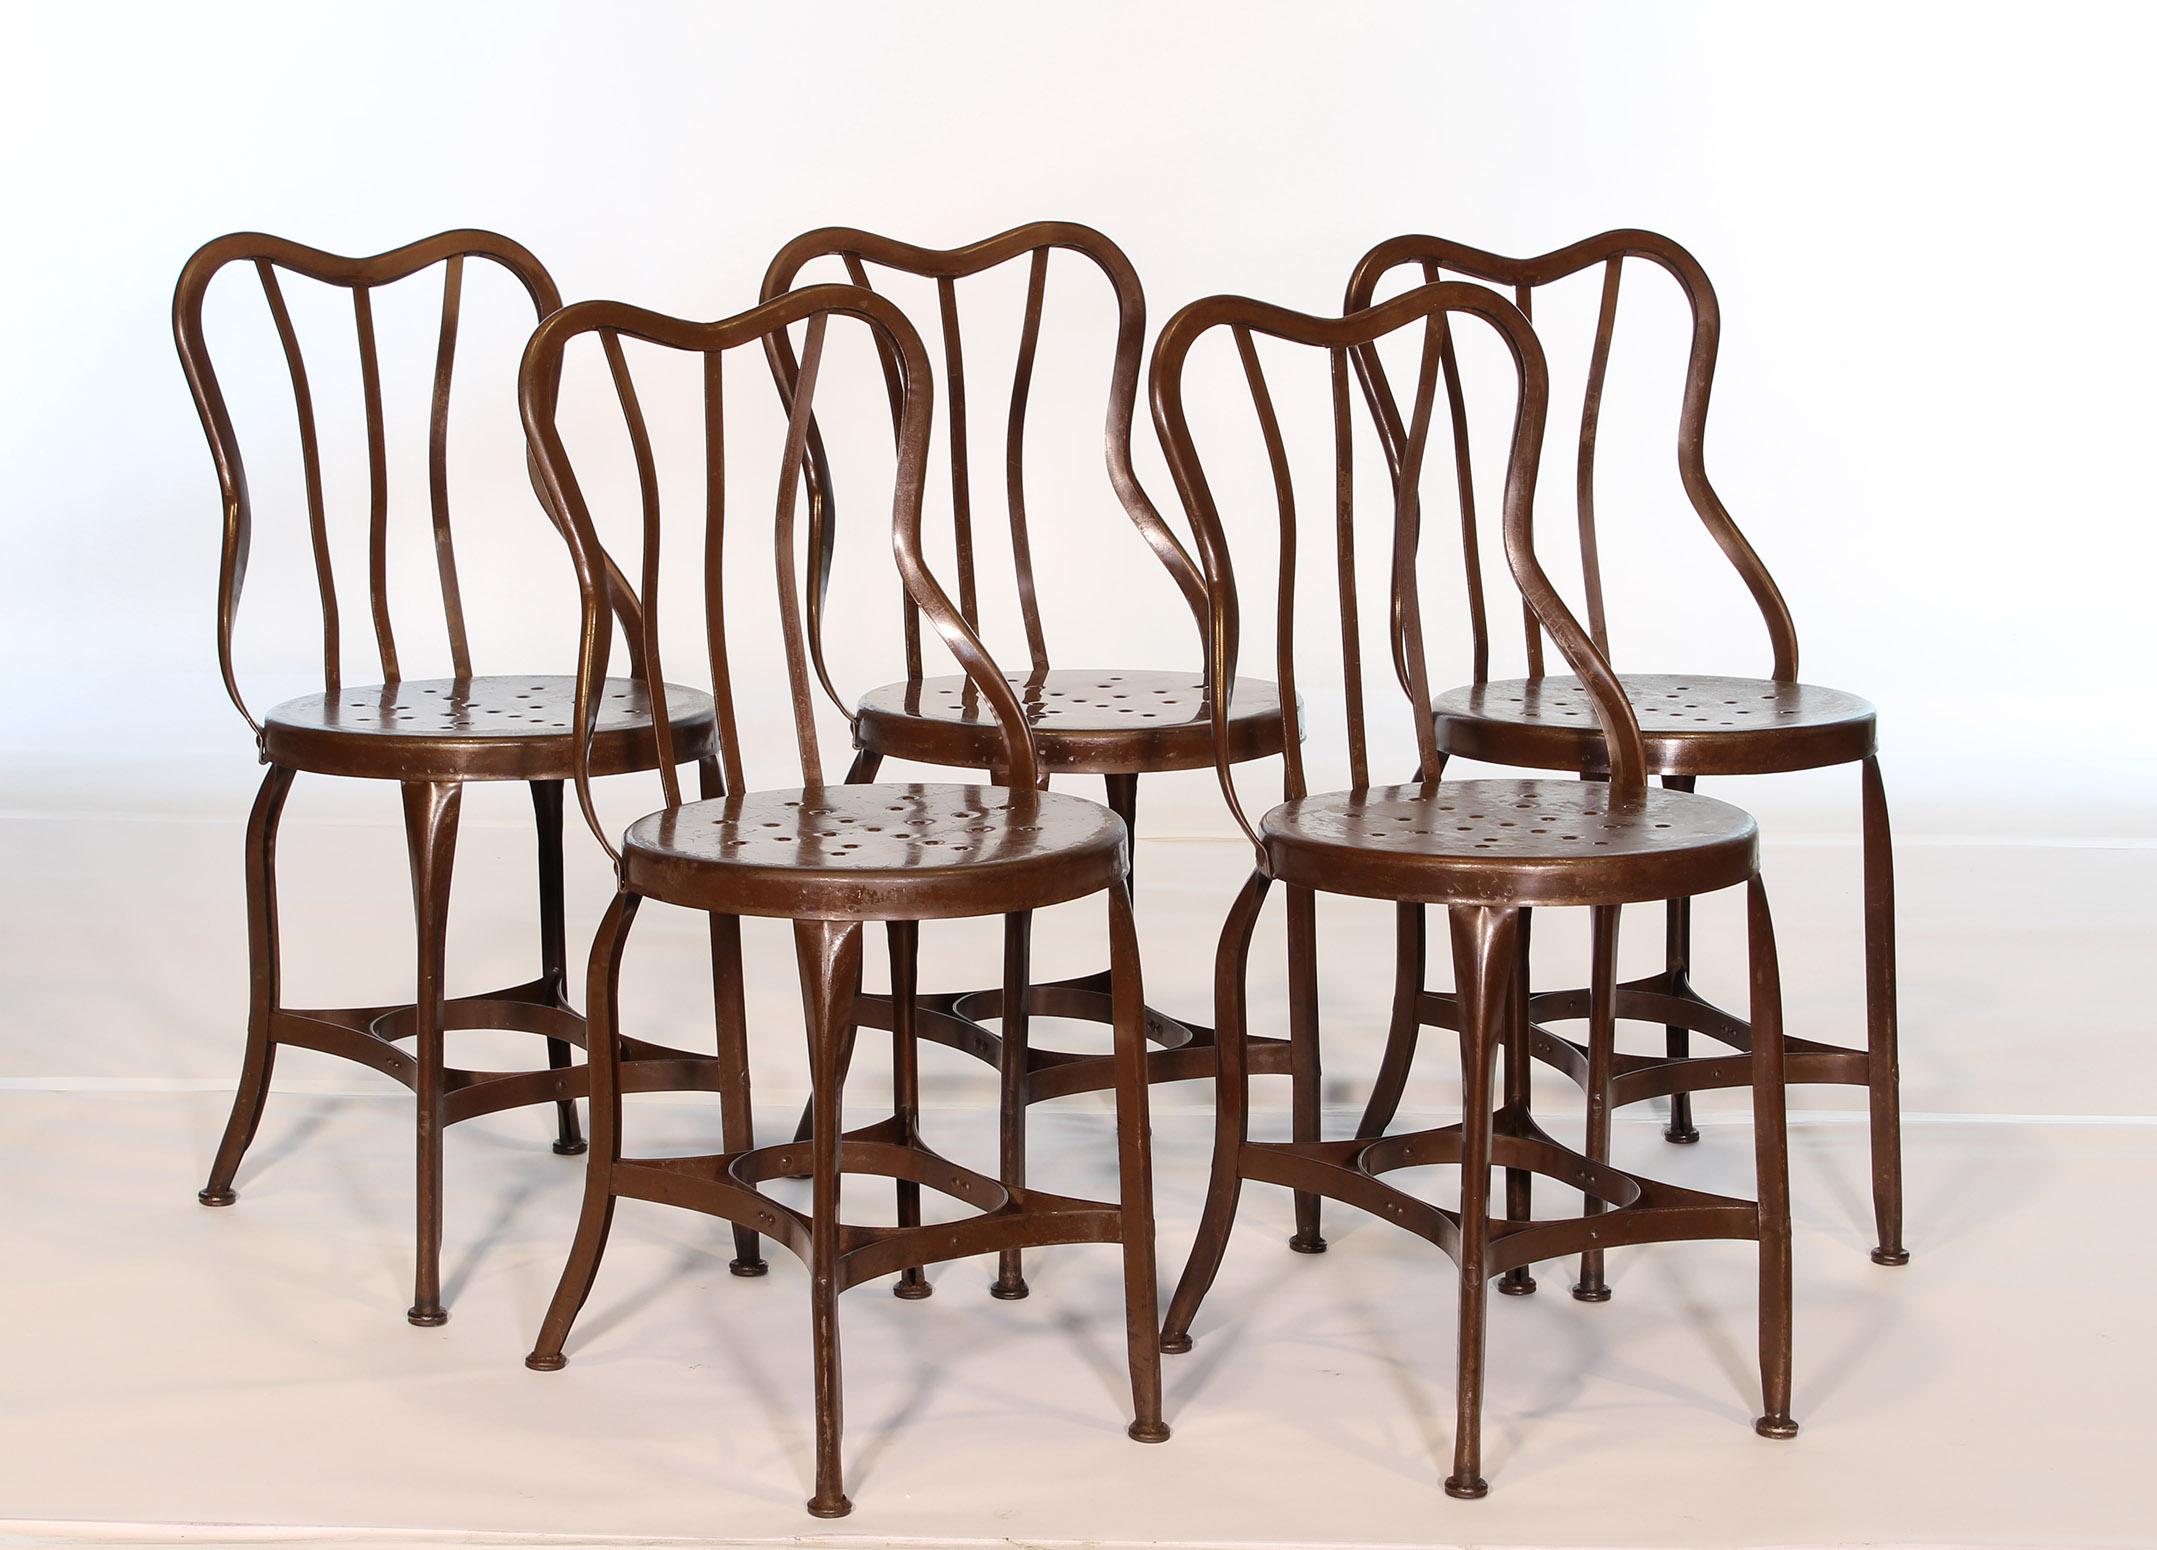 Set of 5 Antique Metal Cafe Chairs by Toledo 1